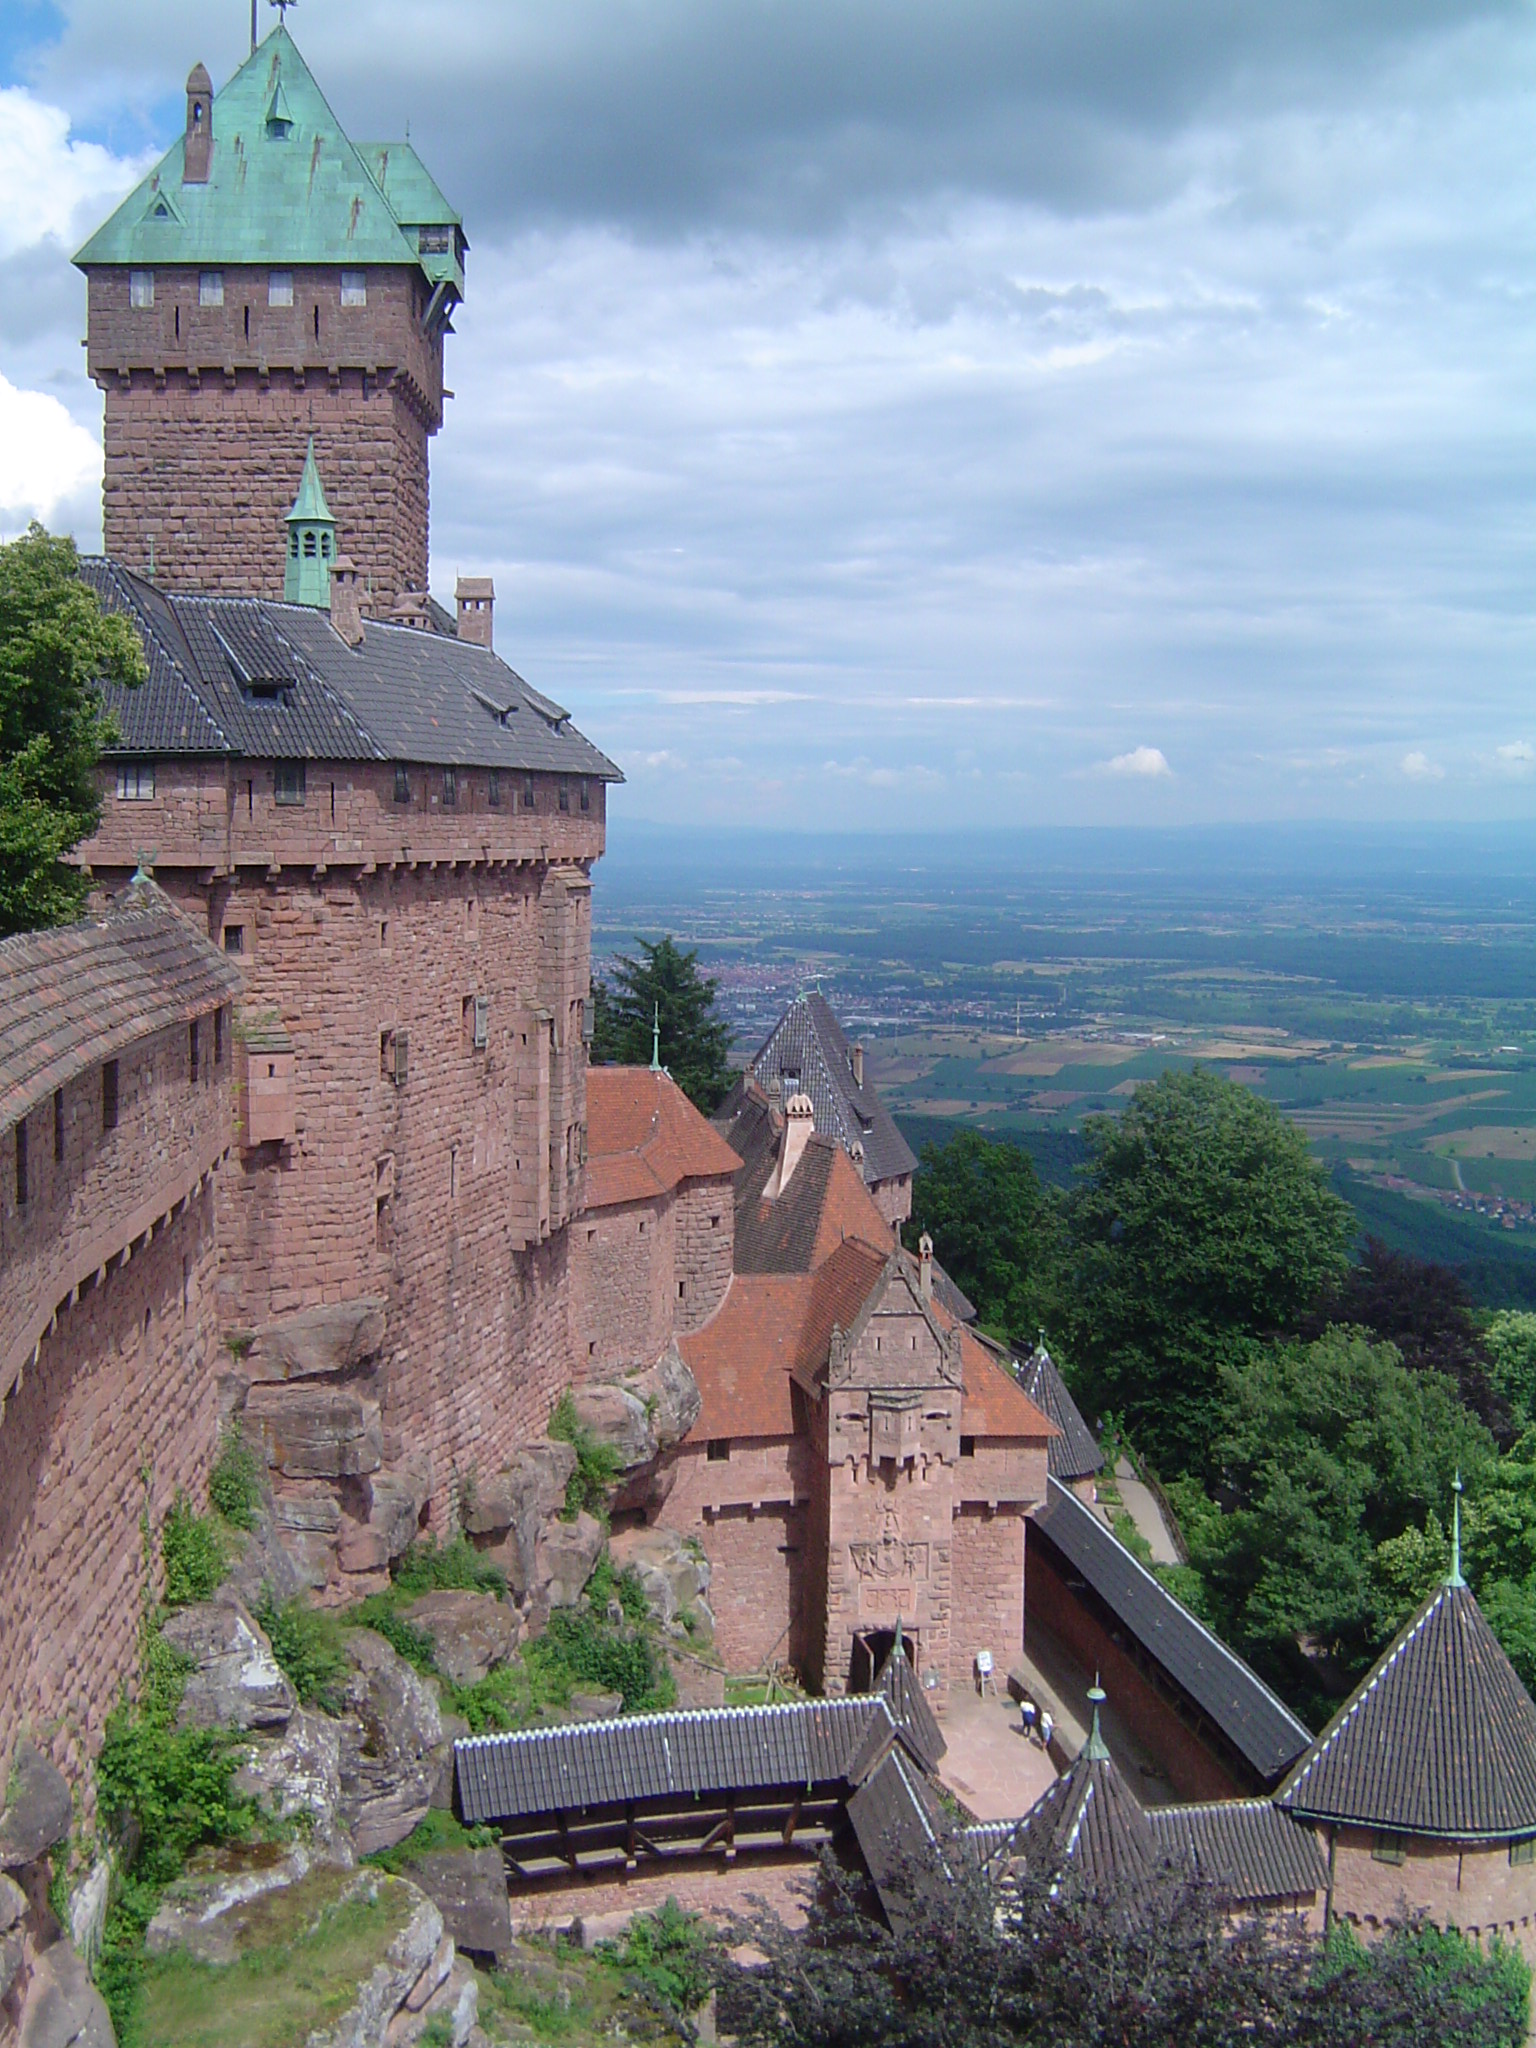 Visitors Guide to Alsace Koenigsbourg castle view from battlements 